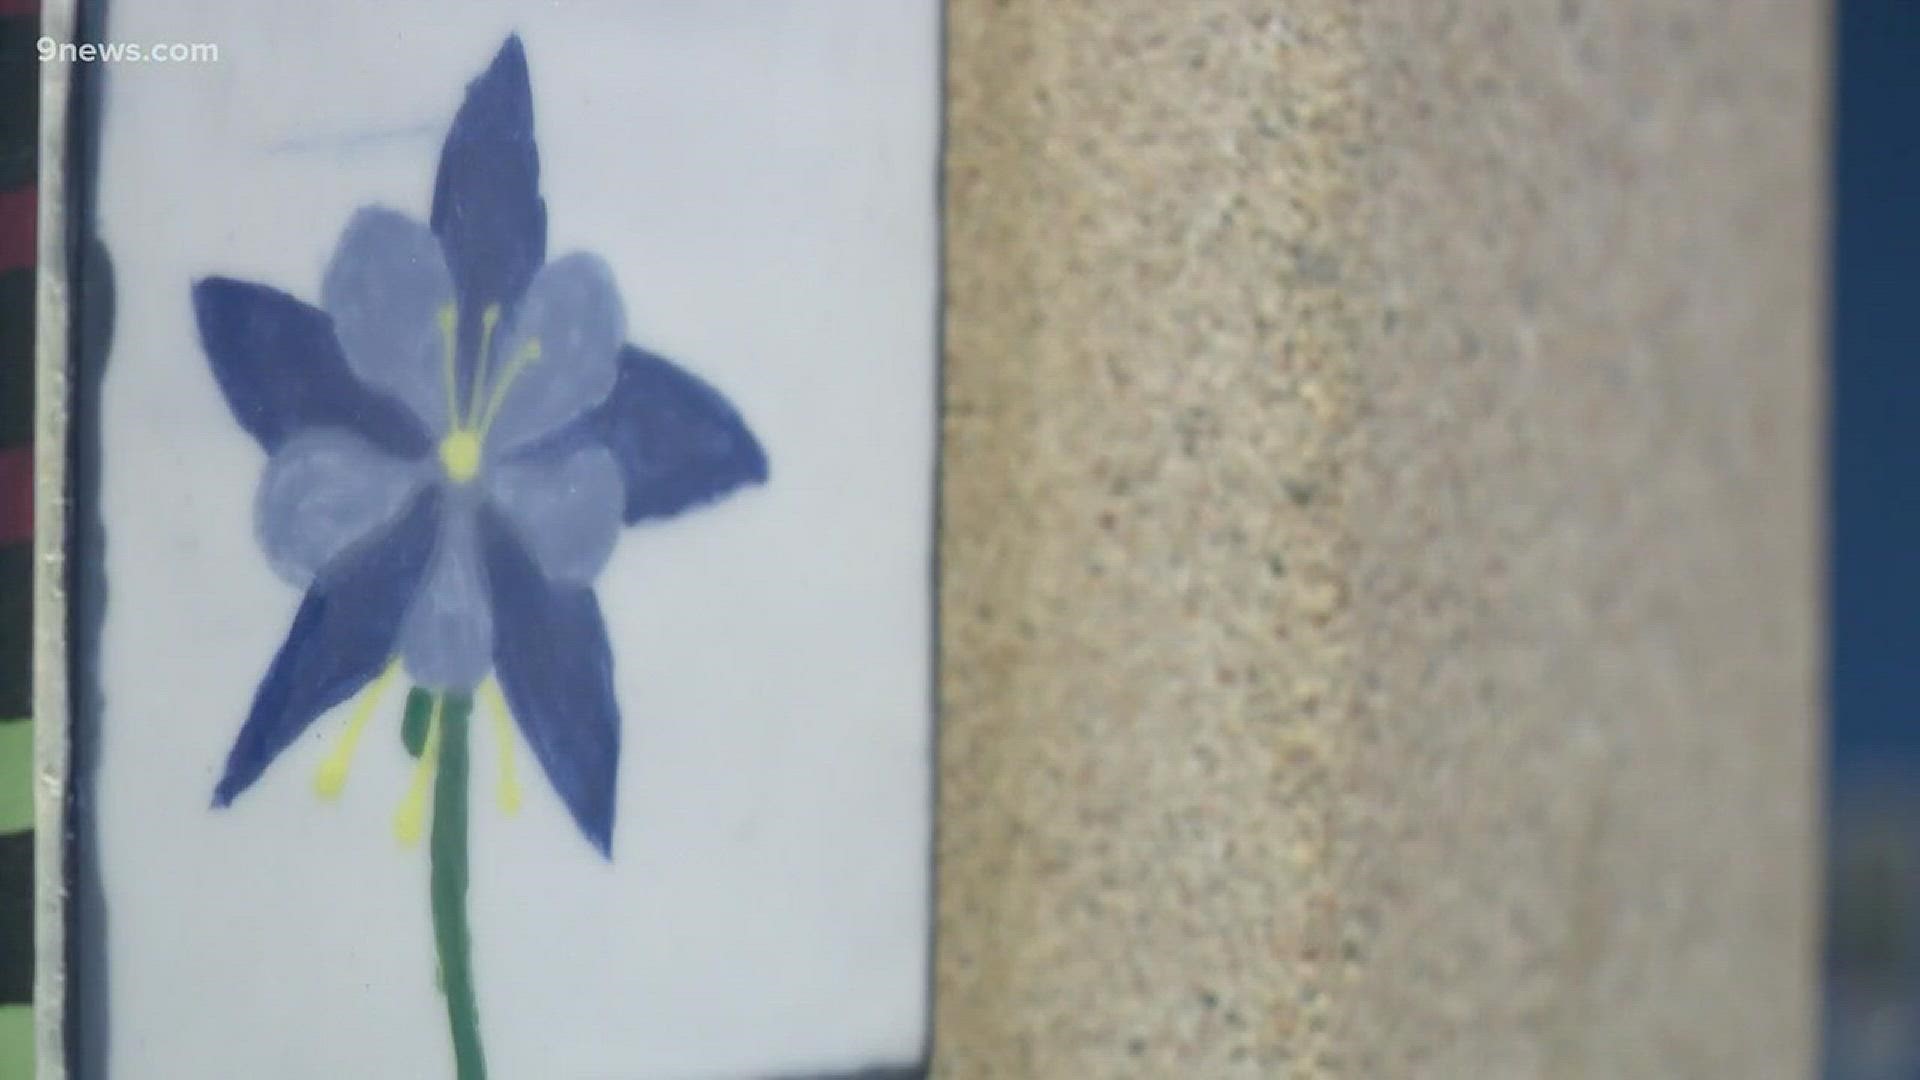 1999 was a year of heartache for the Columbine High School community. There was, however, an exception one afternoon six months after the tragedy that was filled with joy and celebration.